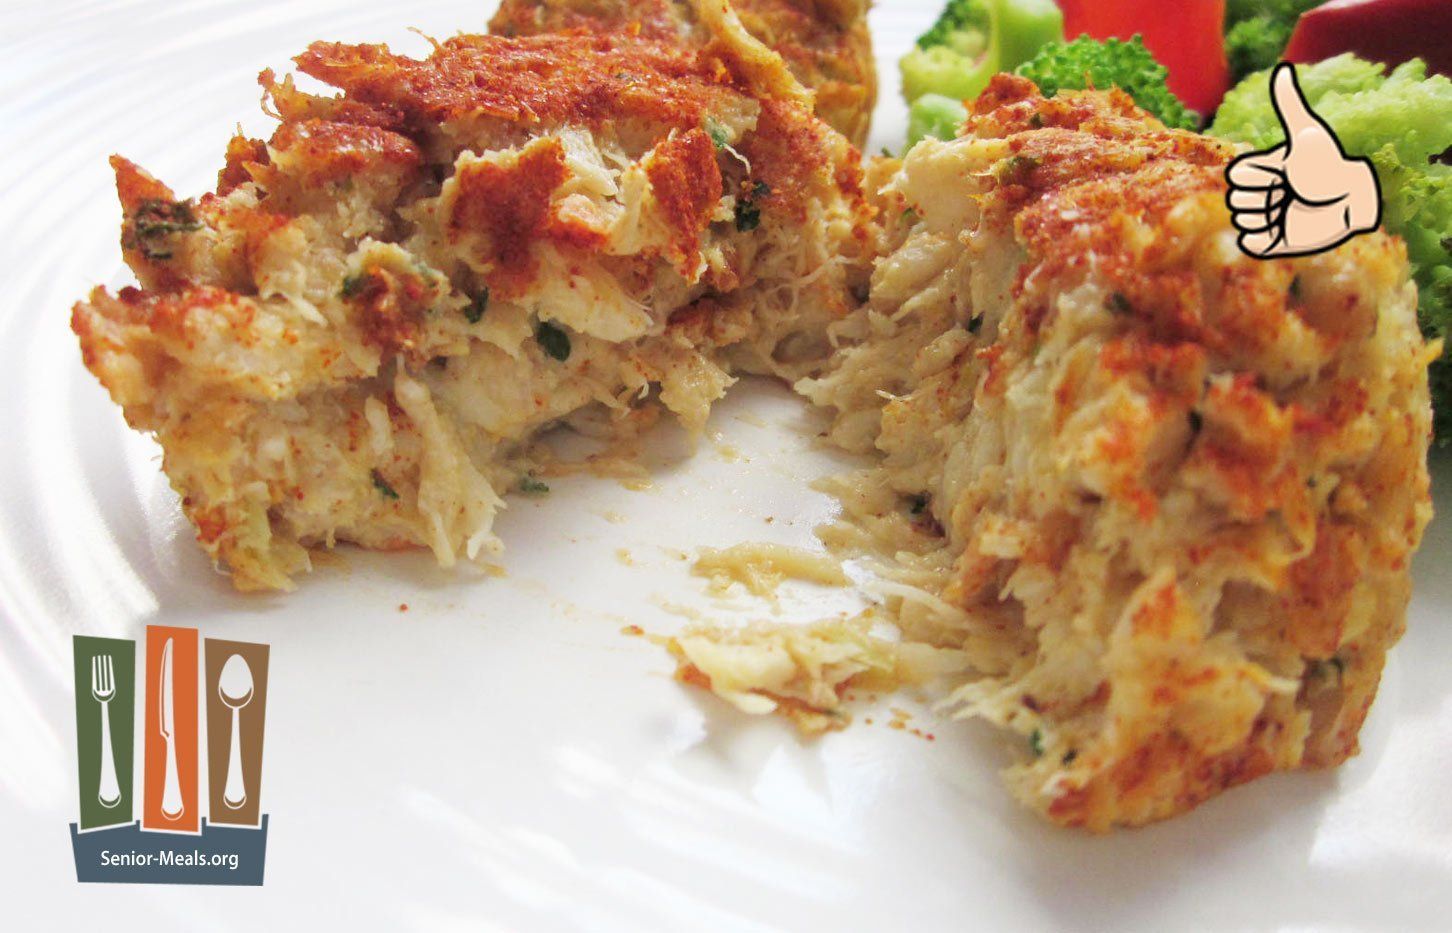 The Only Meal Delivery We Know Of THat Uses Real Lump Crab Meat! Not the Cheaper Crab Substitute.